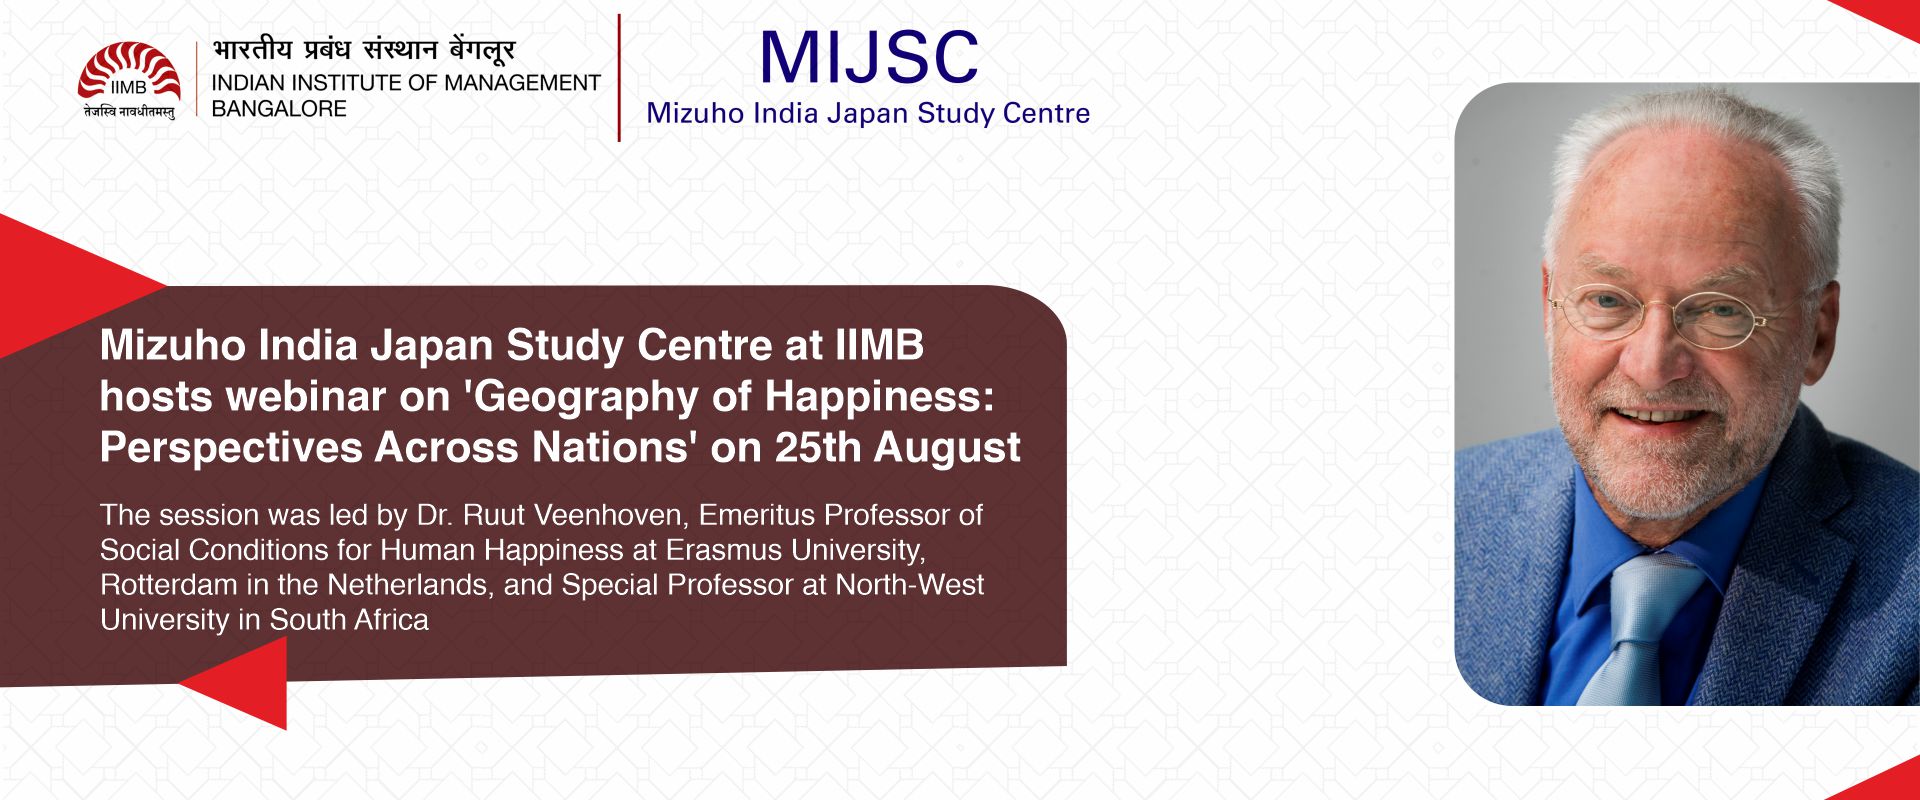 Mizuho India Japan Study Centre at IIMB hosts webinar on ‘Geography of Happiness: Perspectives Across Nations’ on 25th August